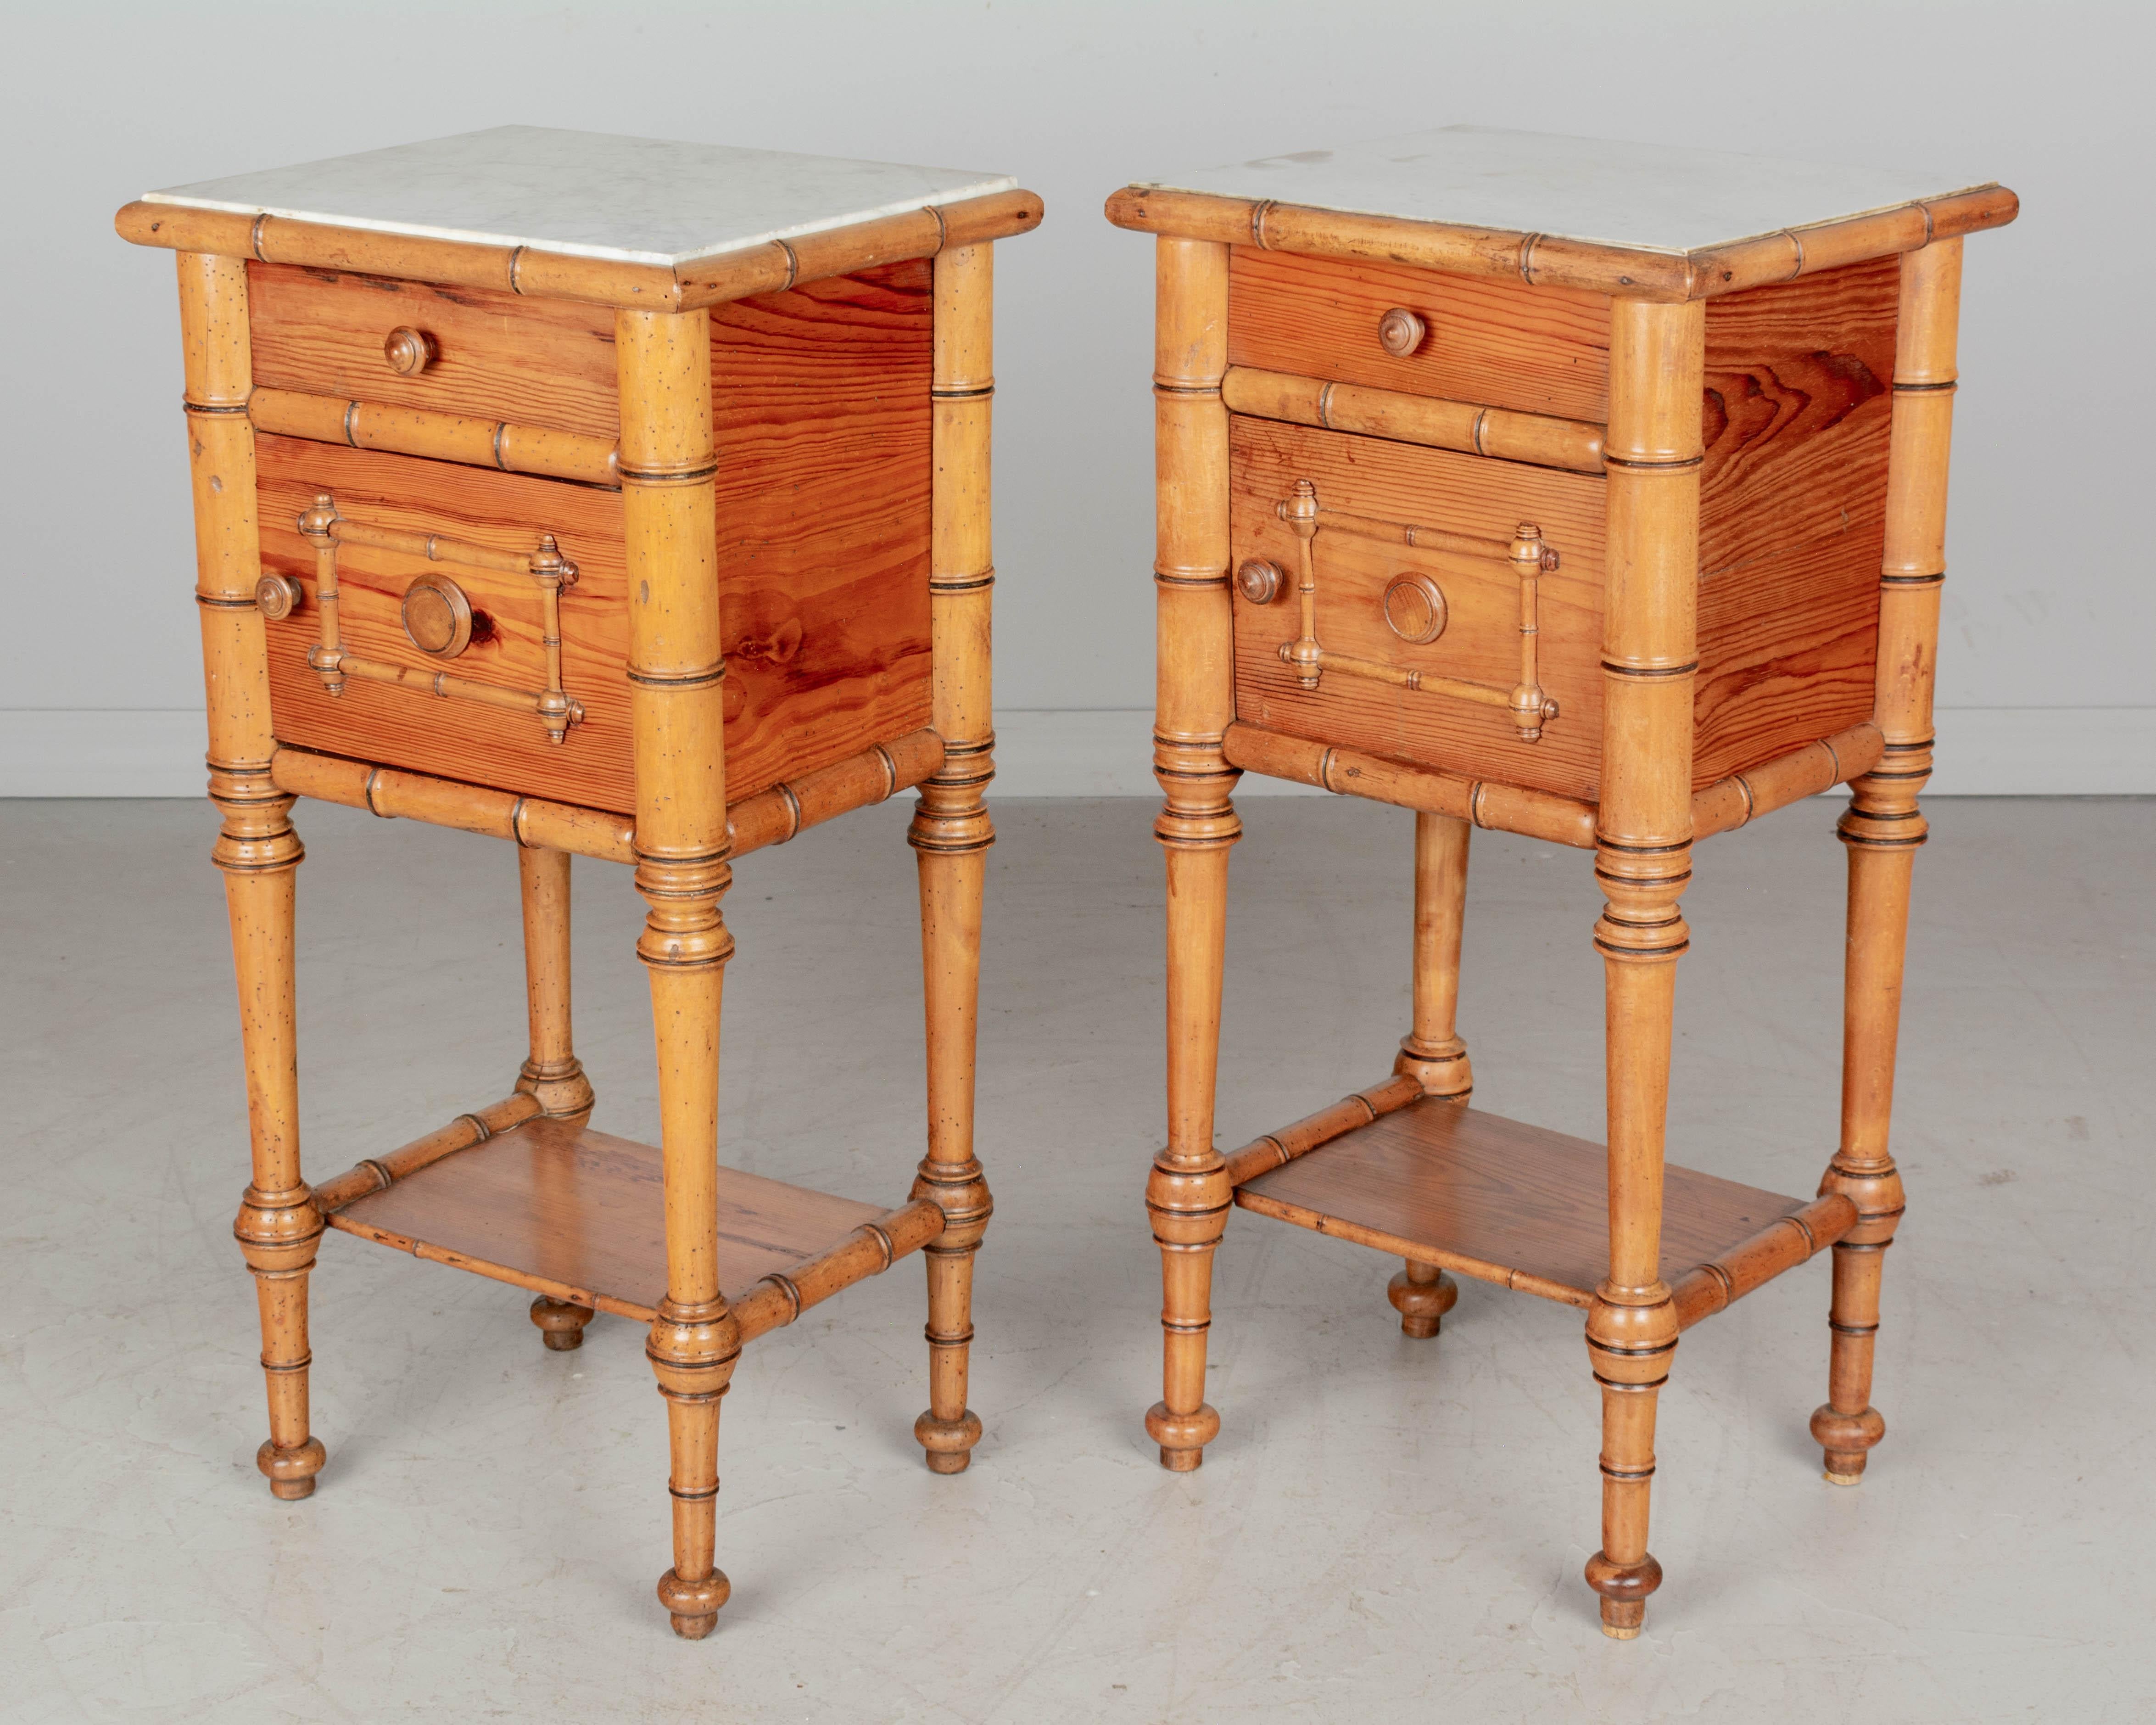 Hand-Crafted Pair of 19th Century French Faux Bamboo Nightstands